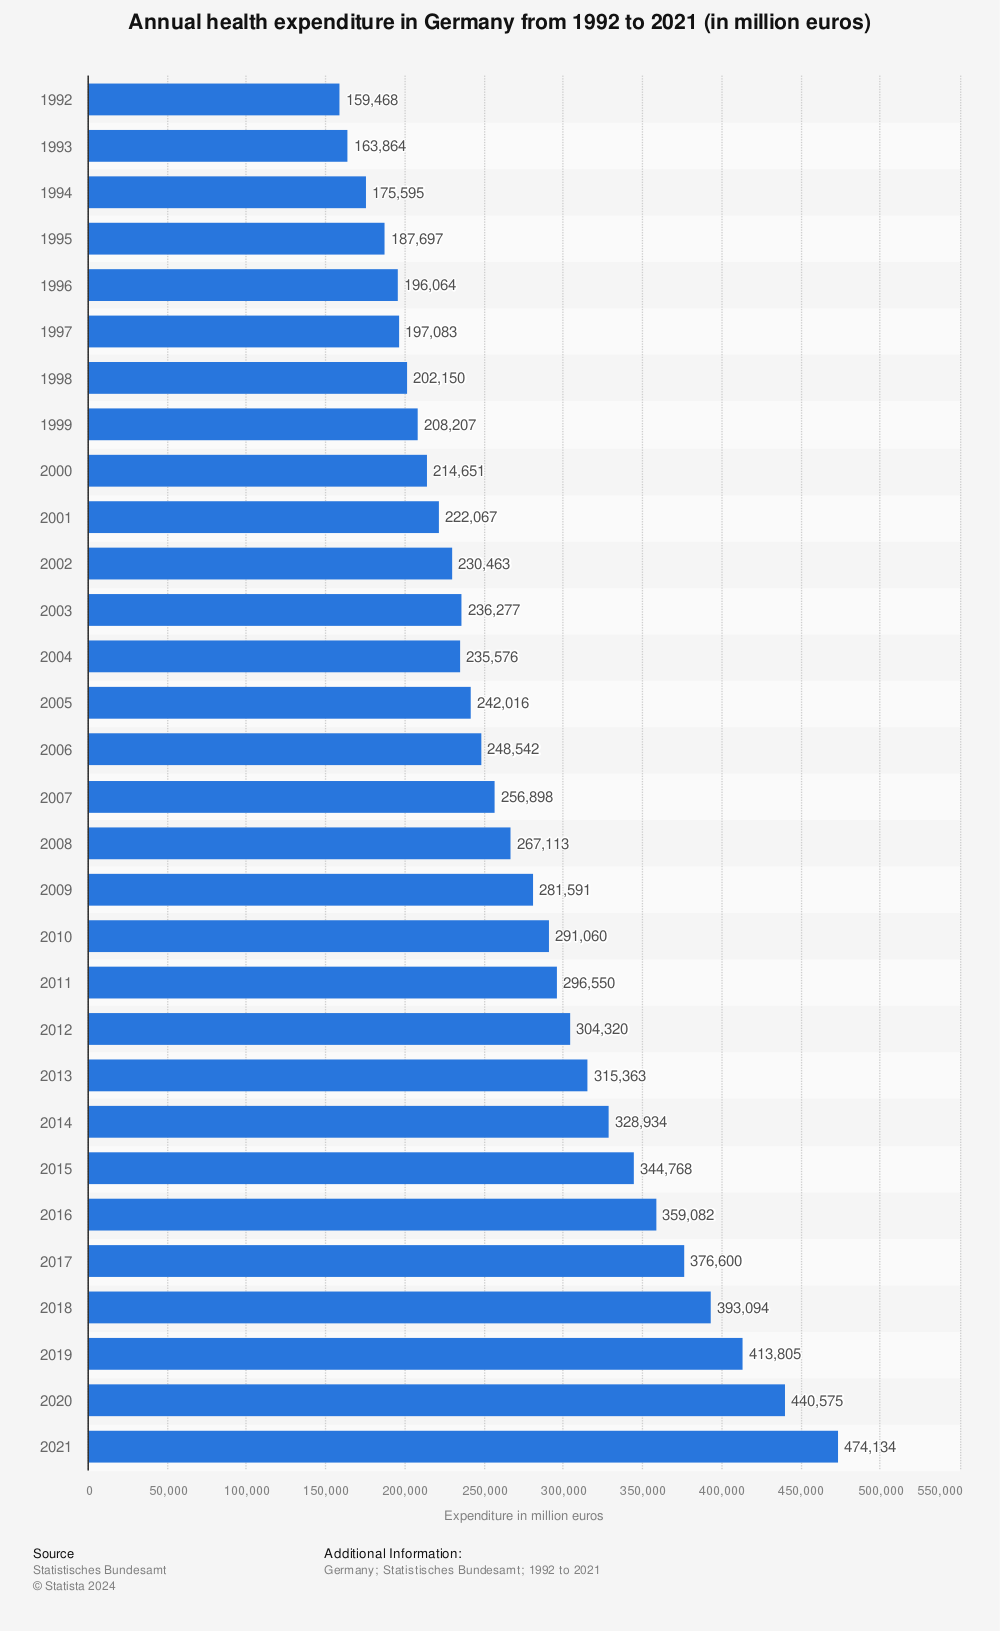 Statistic: Annual health expenditure in Germany from 1992 to 2021 (in million euros) | Statista